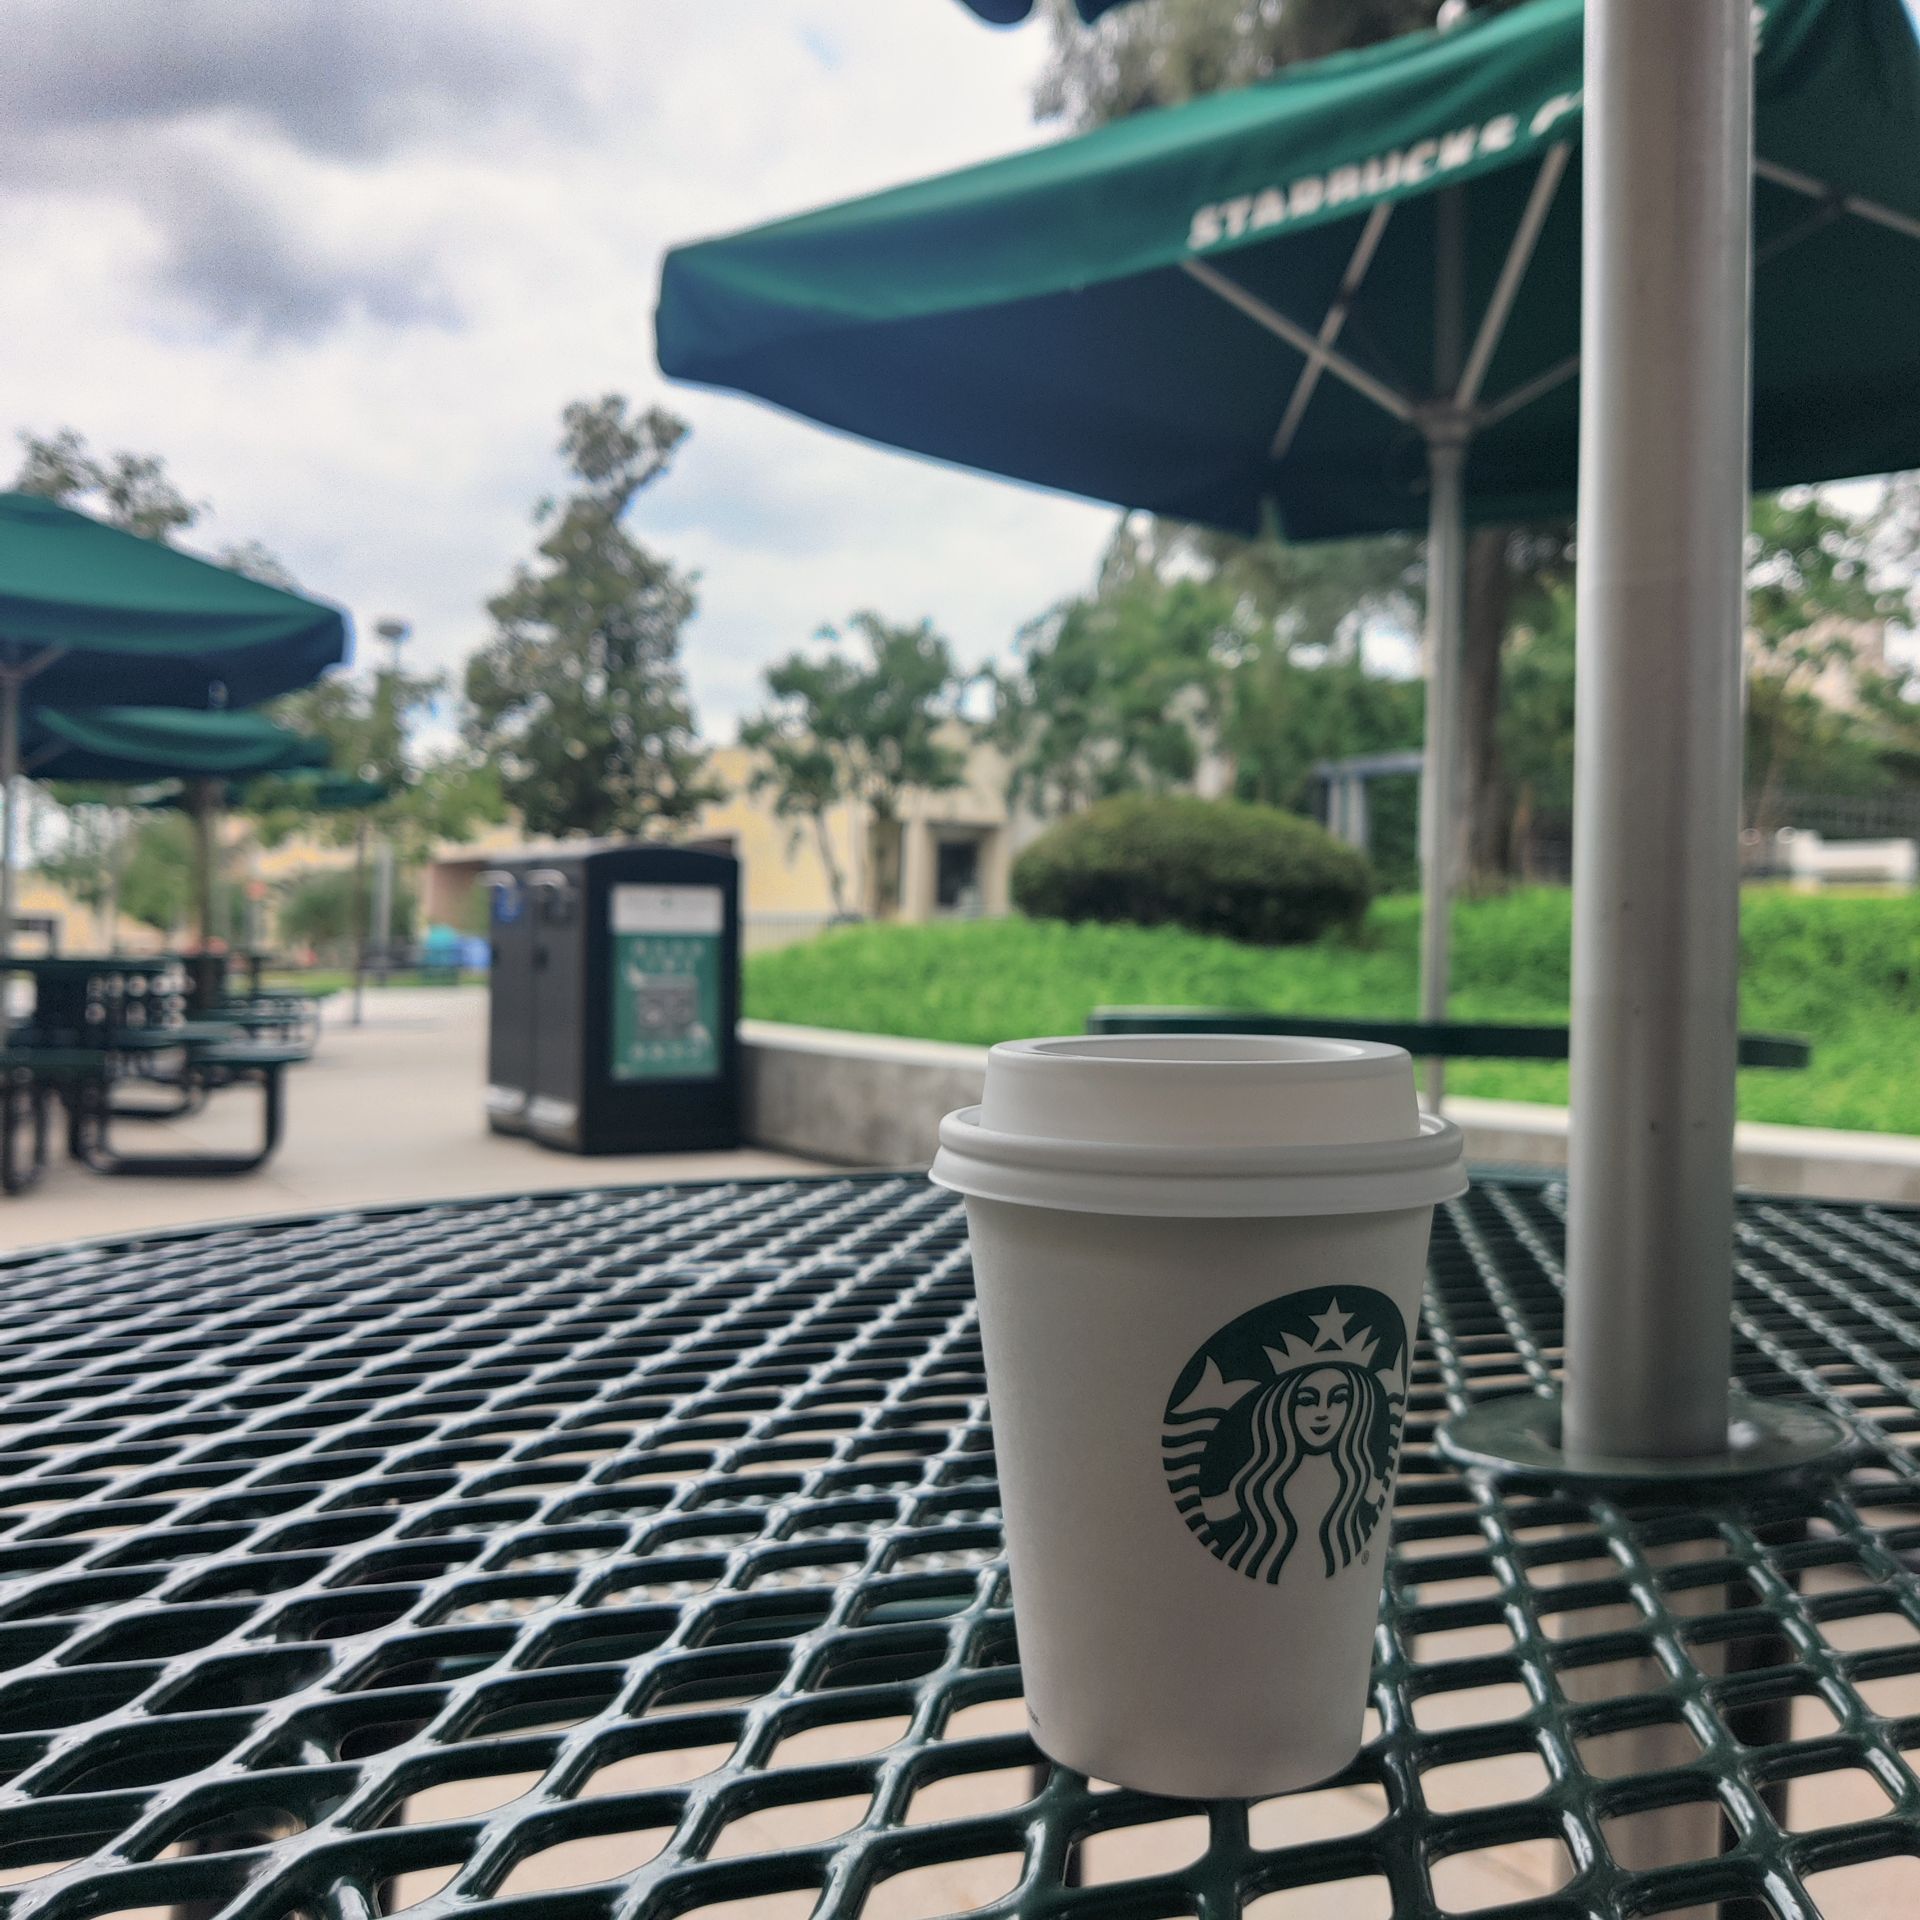 Starbucks paper cup on an outdoor table